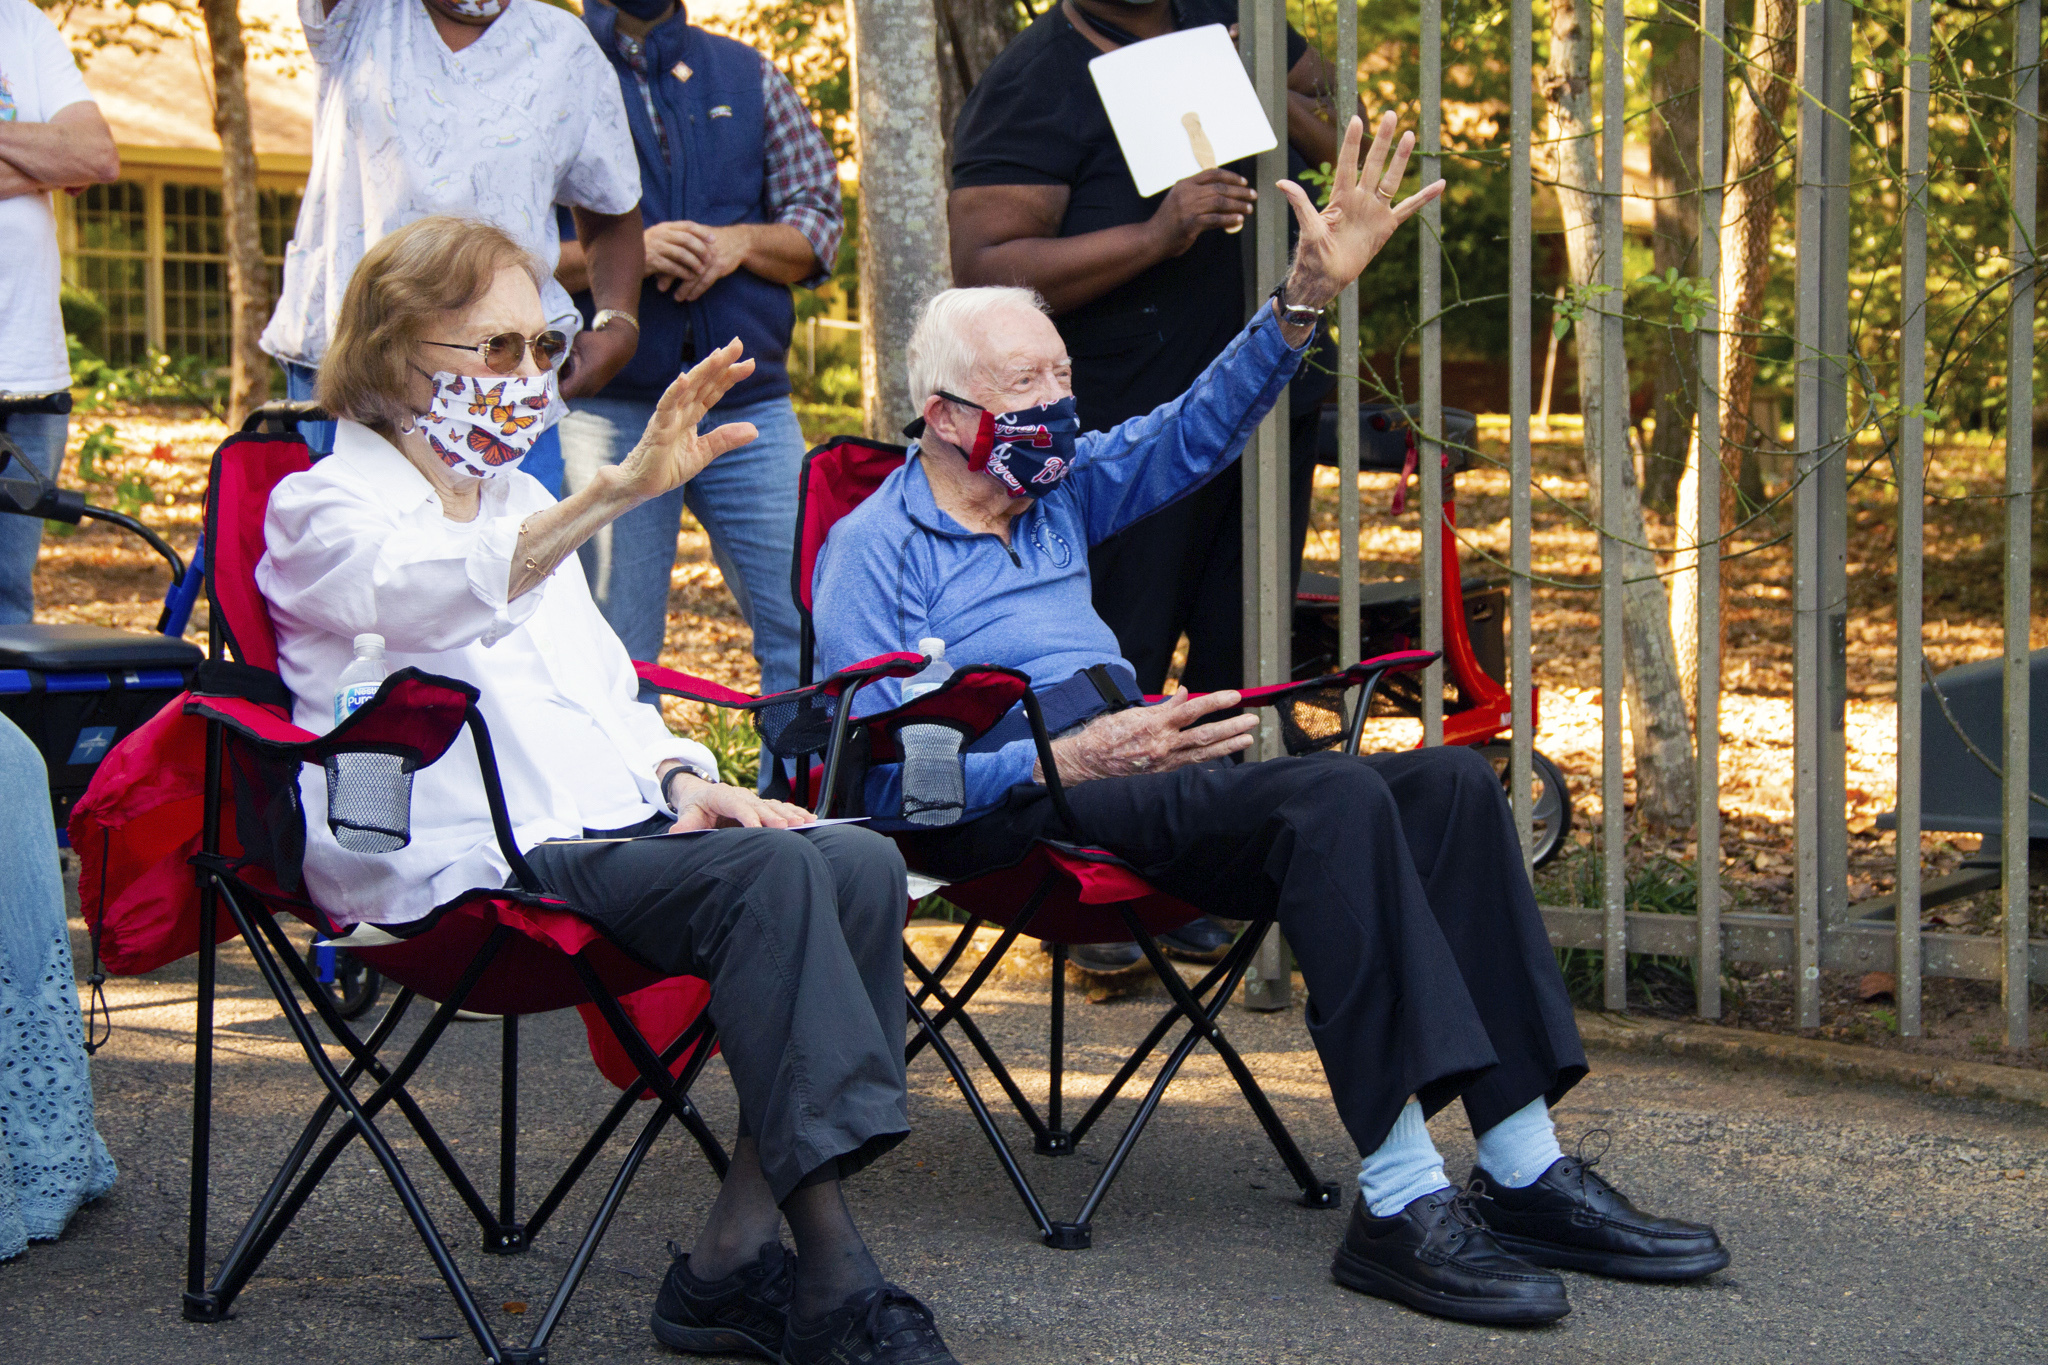 PHOTO: This photo provided by The Carter Center shows former President Jimmy Carter and former first lady Rosalynn Carter, Thursday, Oct. 1, 2020 in Plains, Ga., celebrating his 96th birthday.